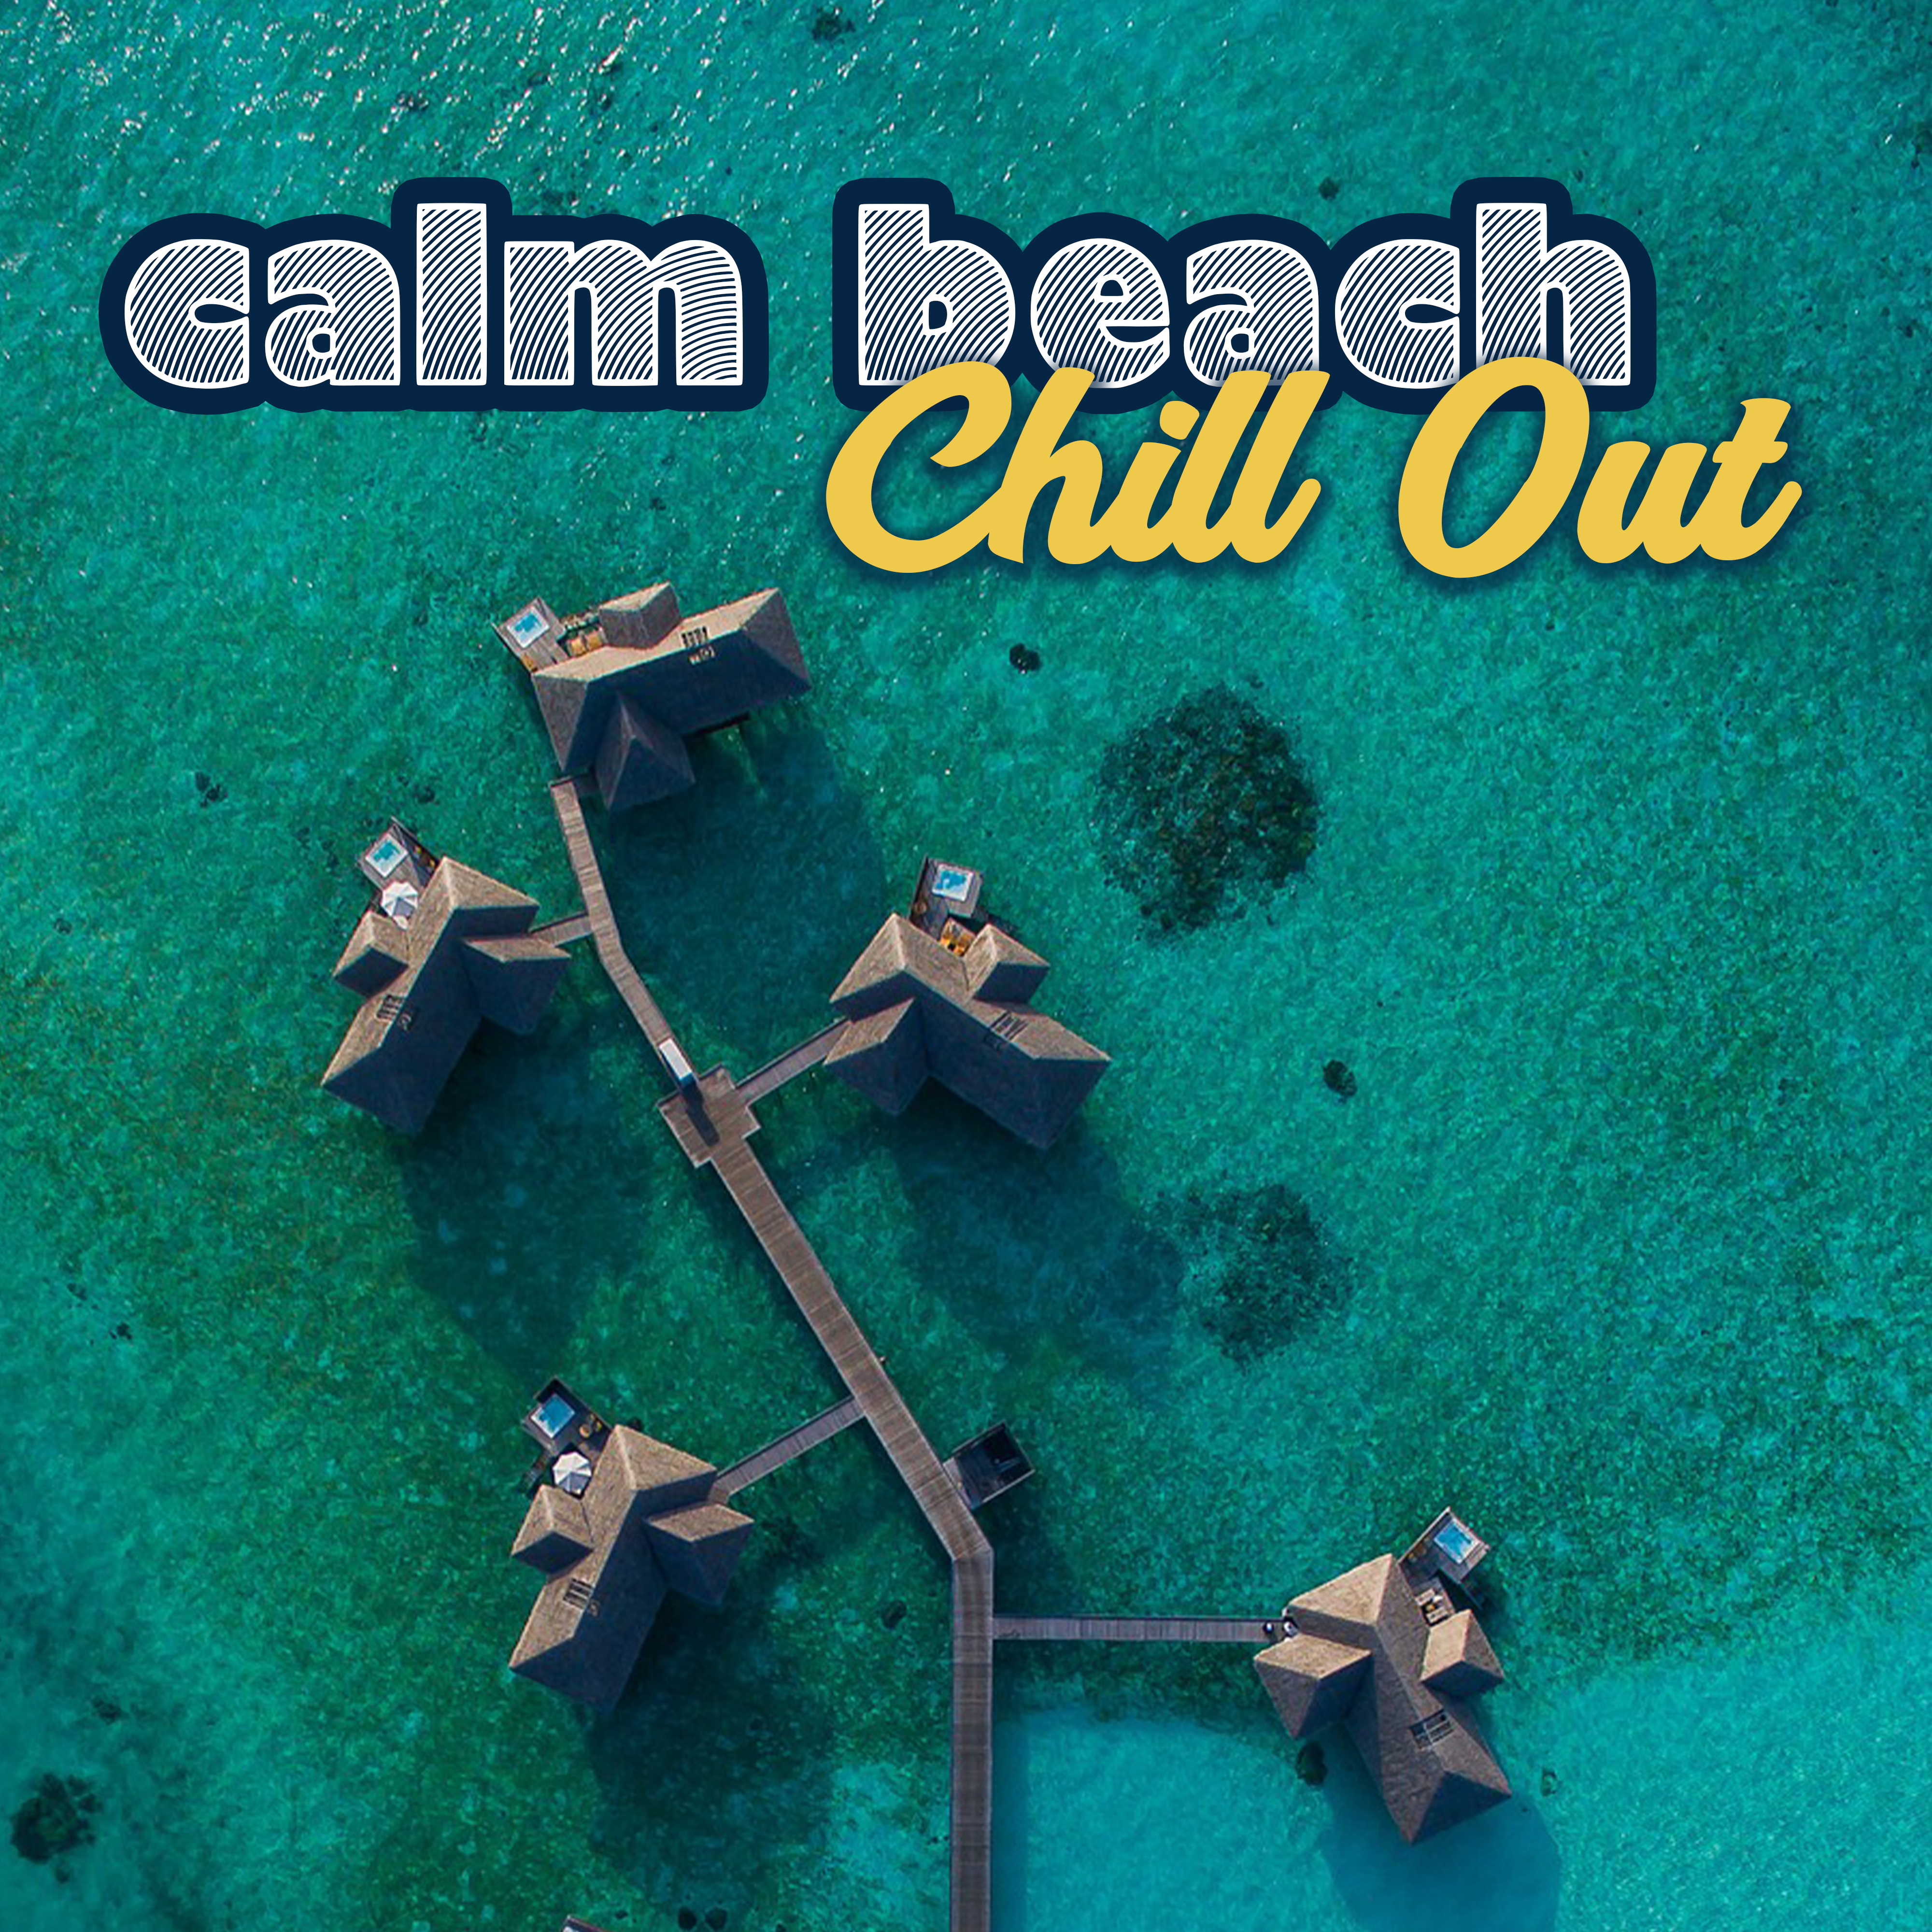 Calm Beach Chill Out  Stress Relief, Soft Sounds, Beach Lounge, Chill Out 2017, Relaxing Vibes